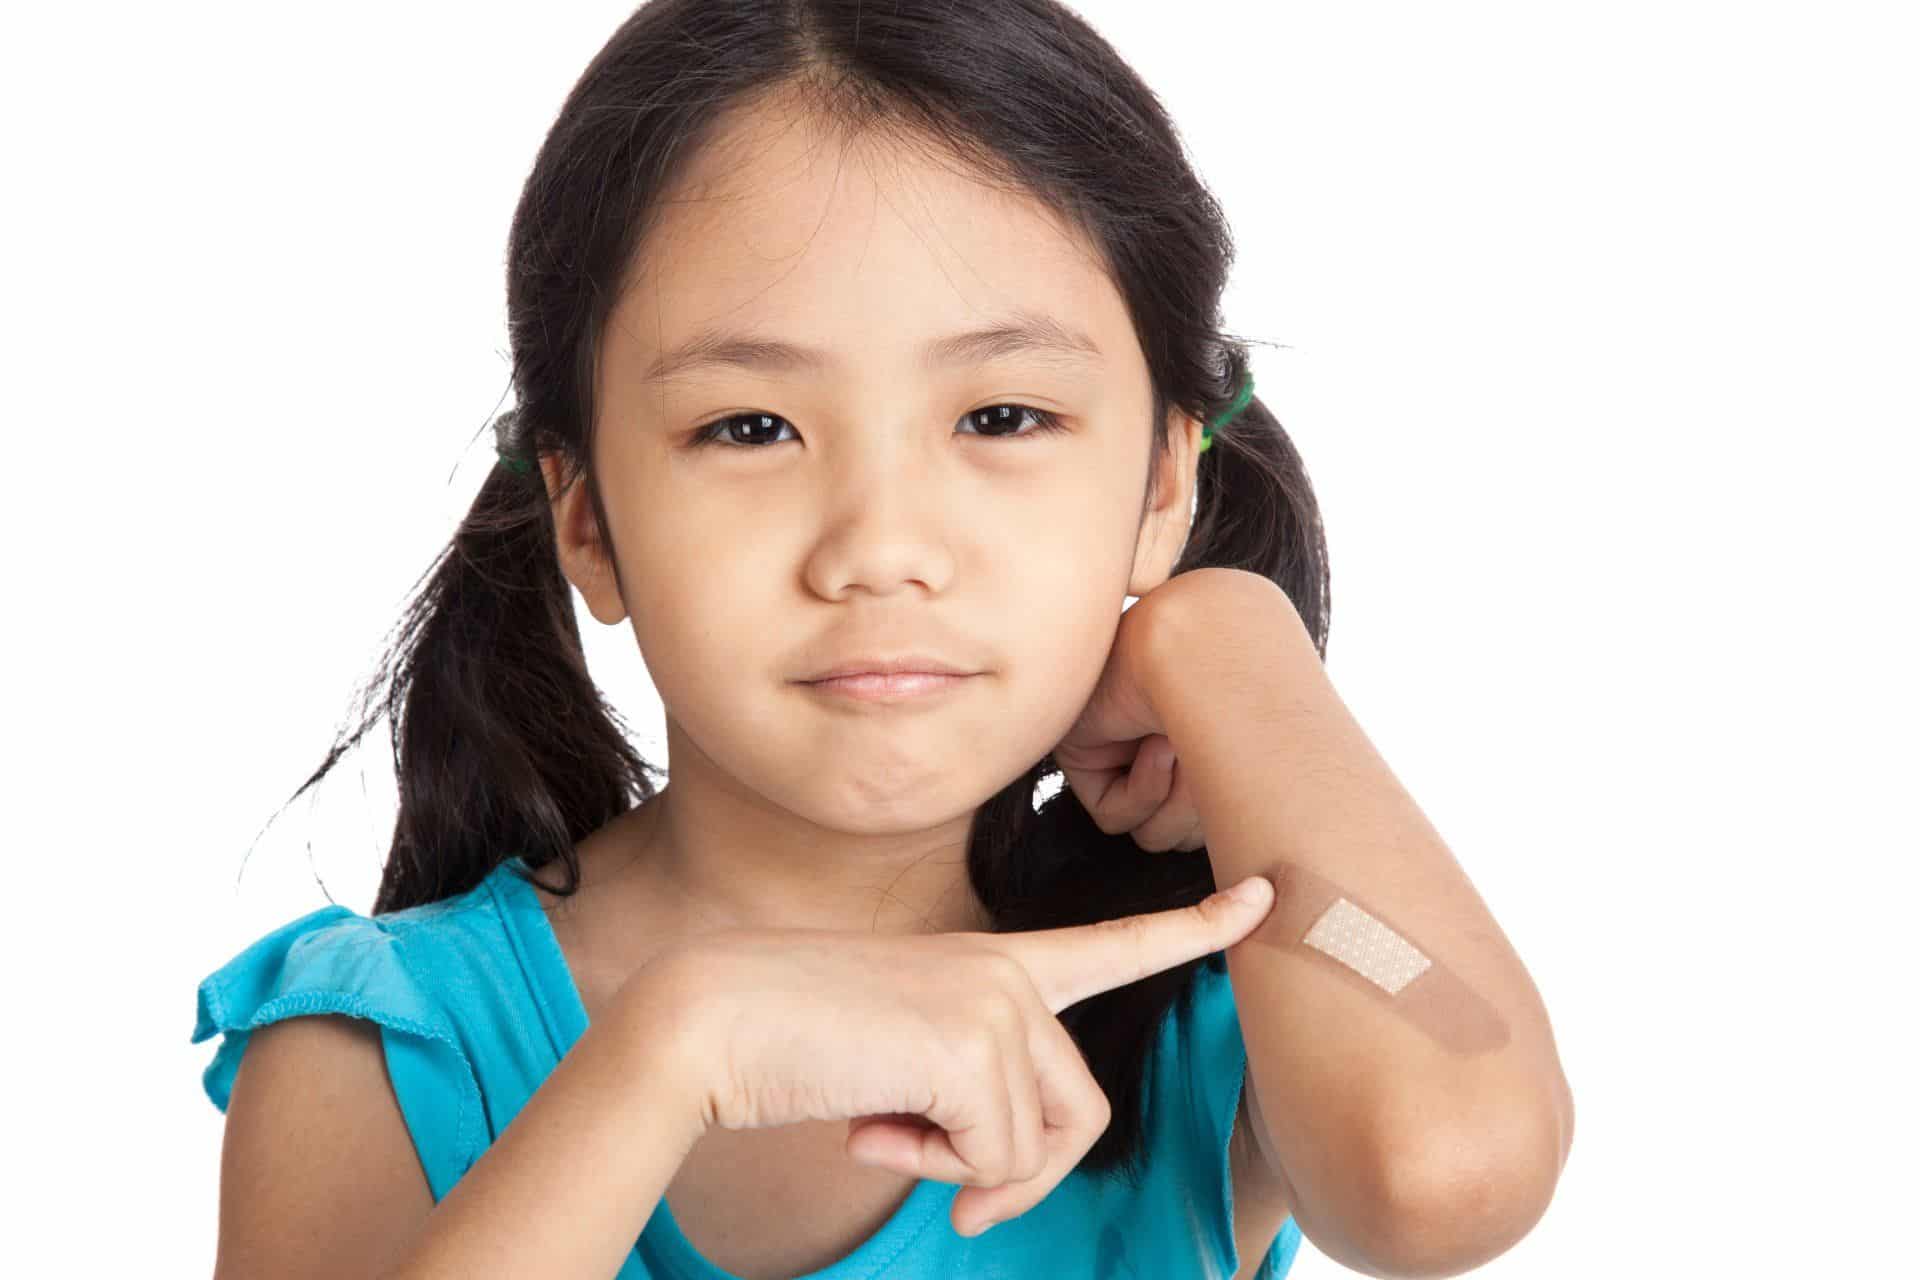 young girl pointing to a band aid on her elbow